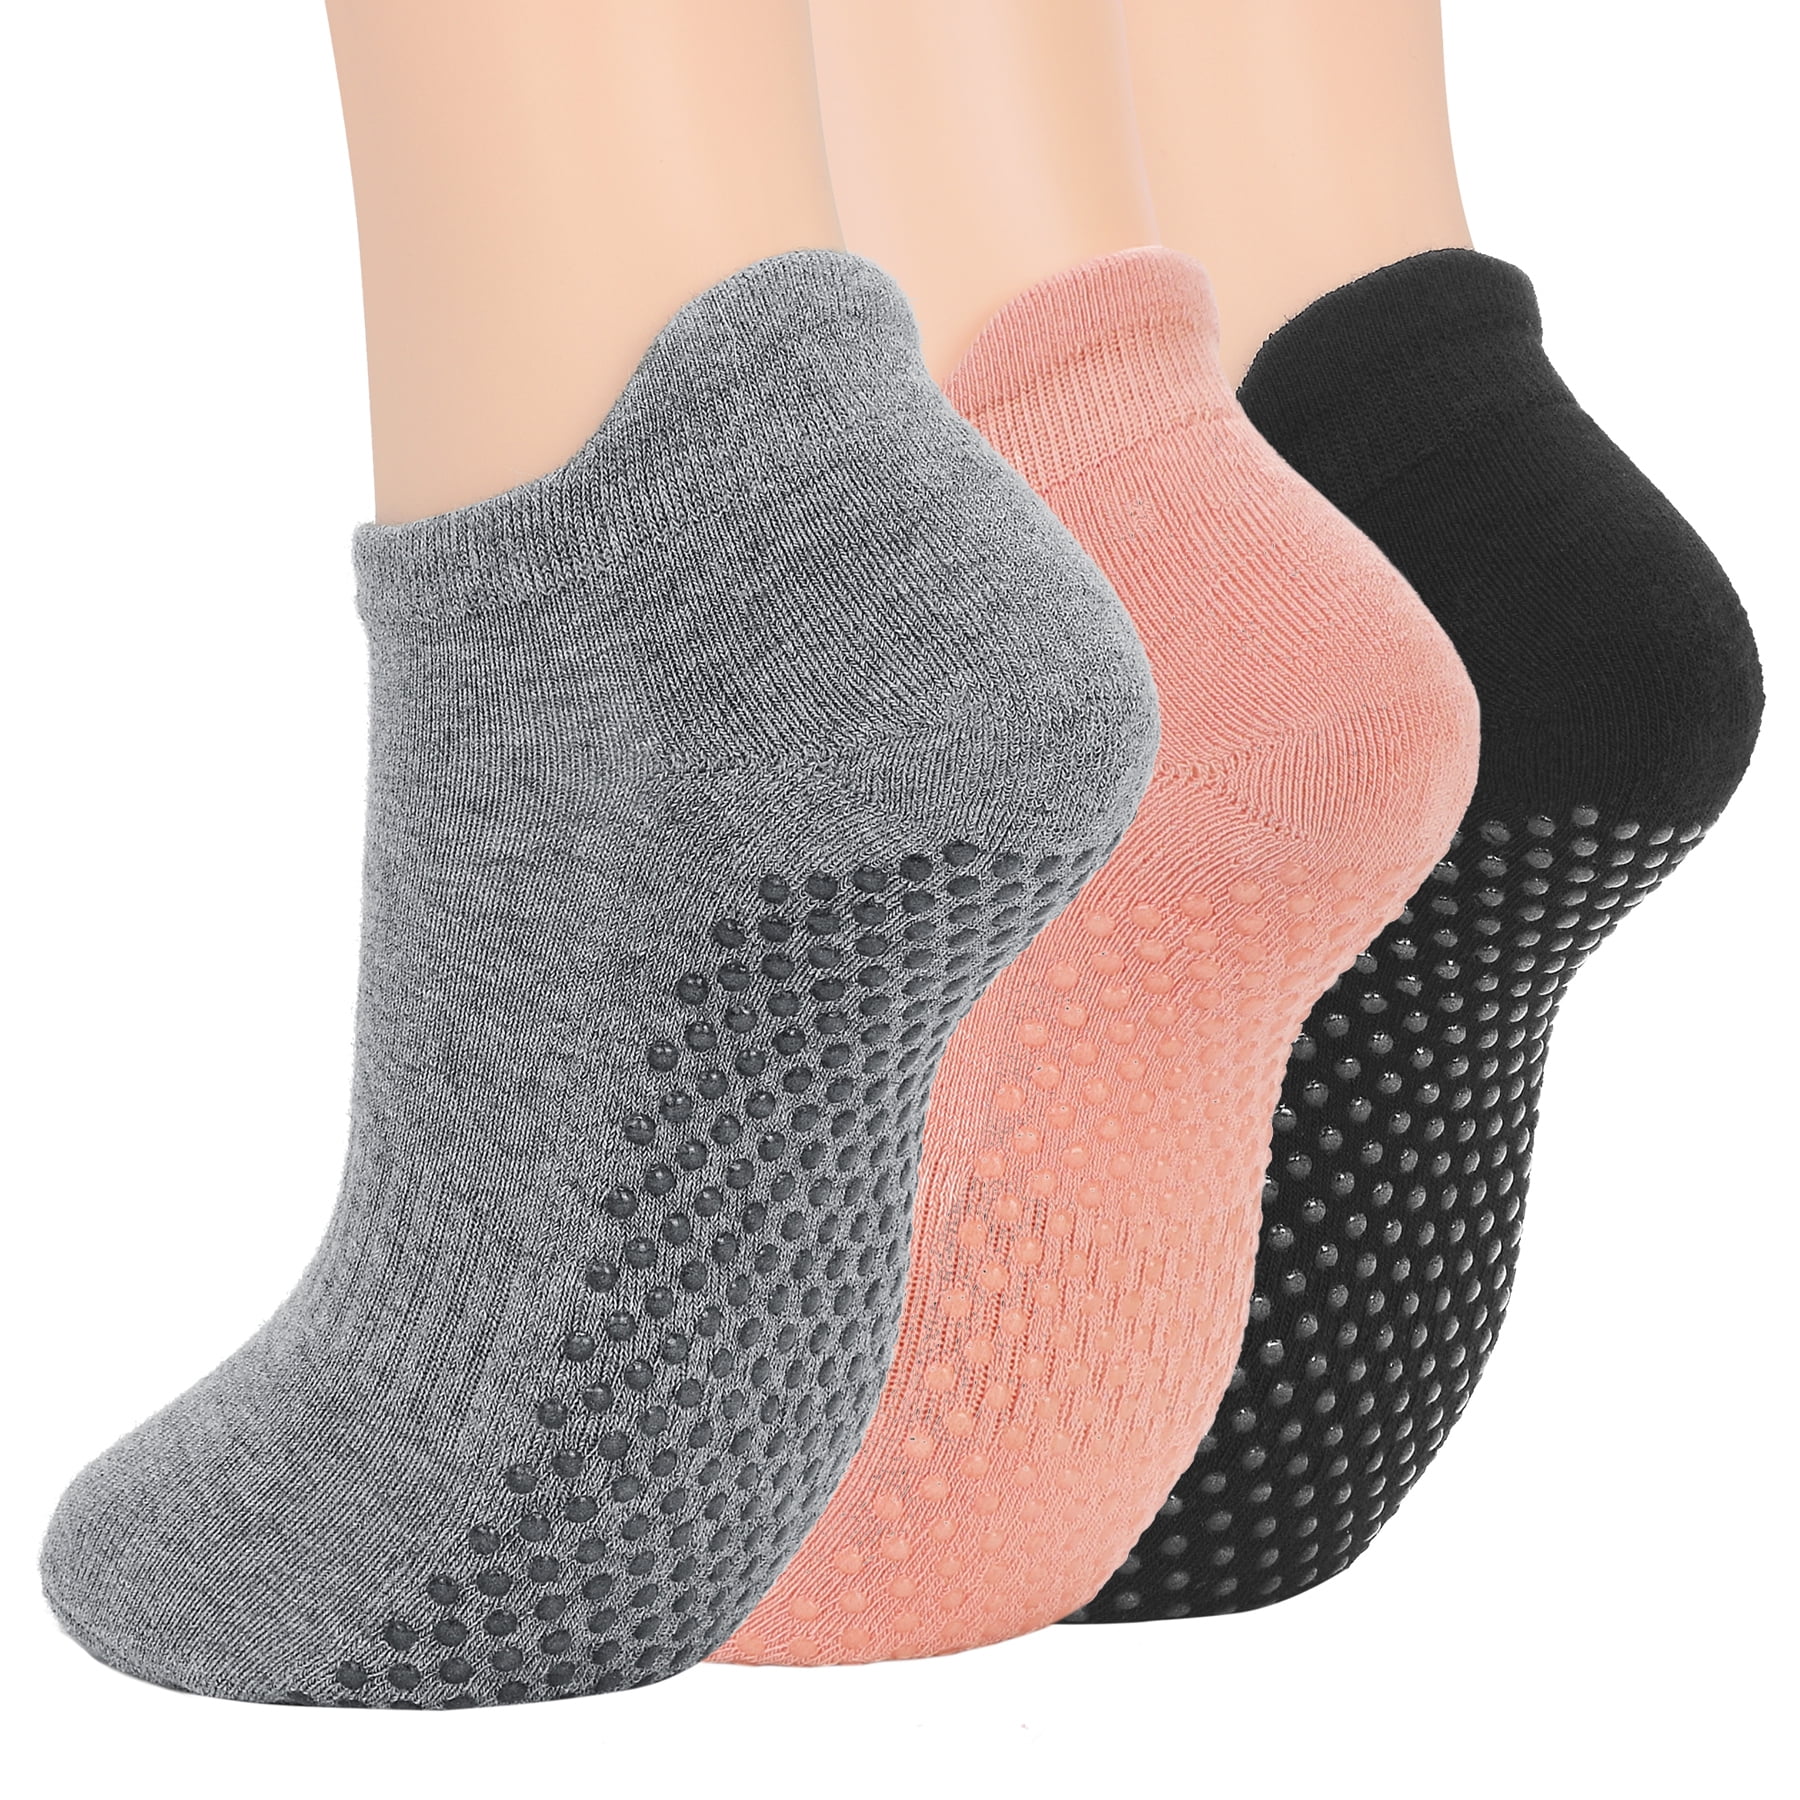 Non Slip Yoga Socks with Grips for Pilates, Ballet, Barre, Barefoot, Hospital  Anti Skid Socks for Women and Men : : Clothing, Shoes & Accessories